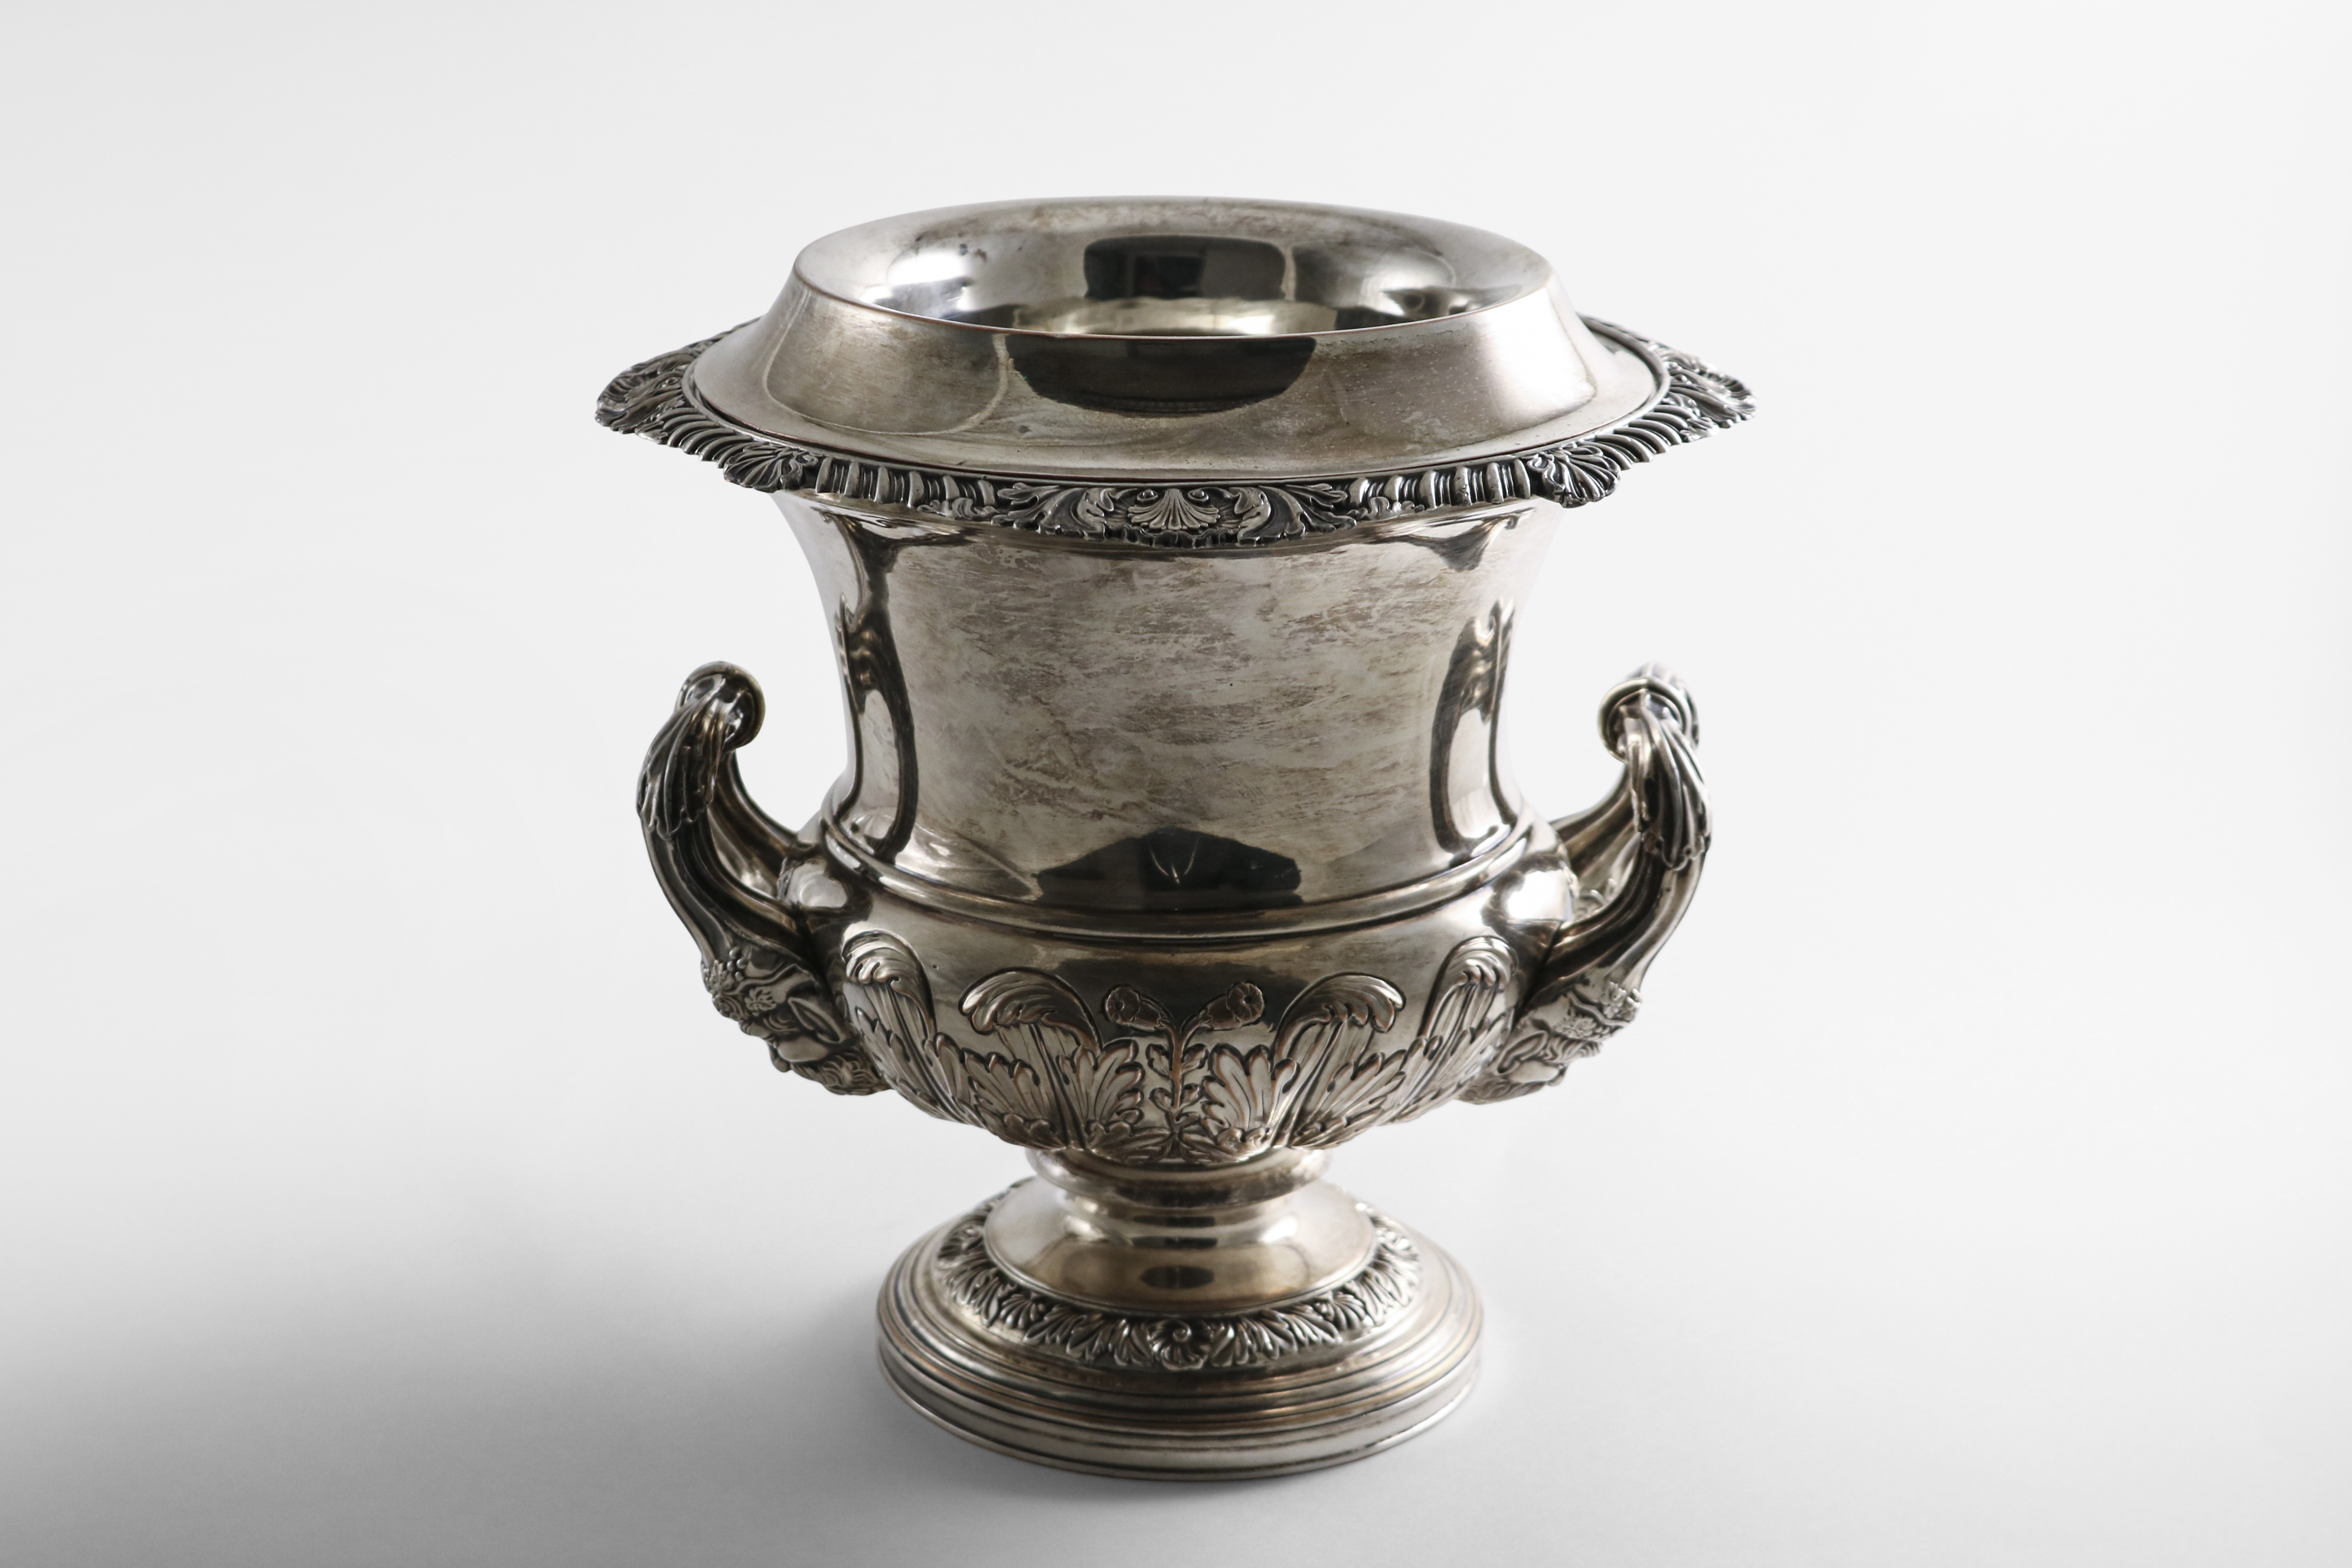 A PAIR OF LATE MIDDLE PERIOD OLD SHEFFIELD PLATED WINE COOLERS of campana form with embossed - Image 2 of 2